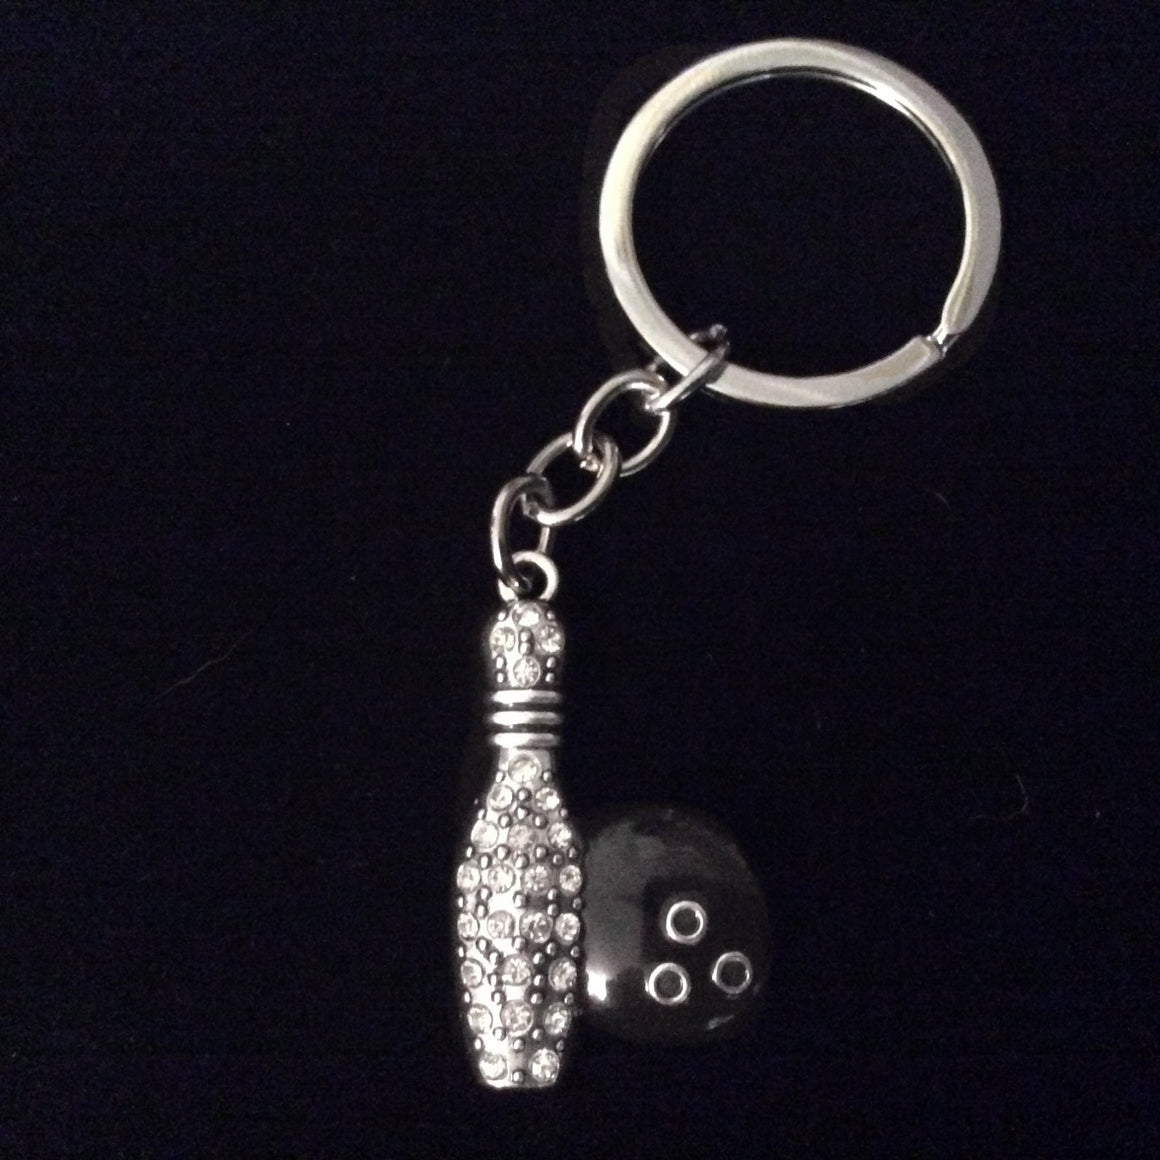 Crystal Bowling Ball and Pin Keychain Silver Key Ring Sports Team Gift